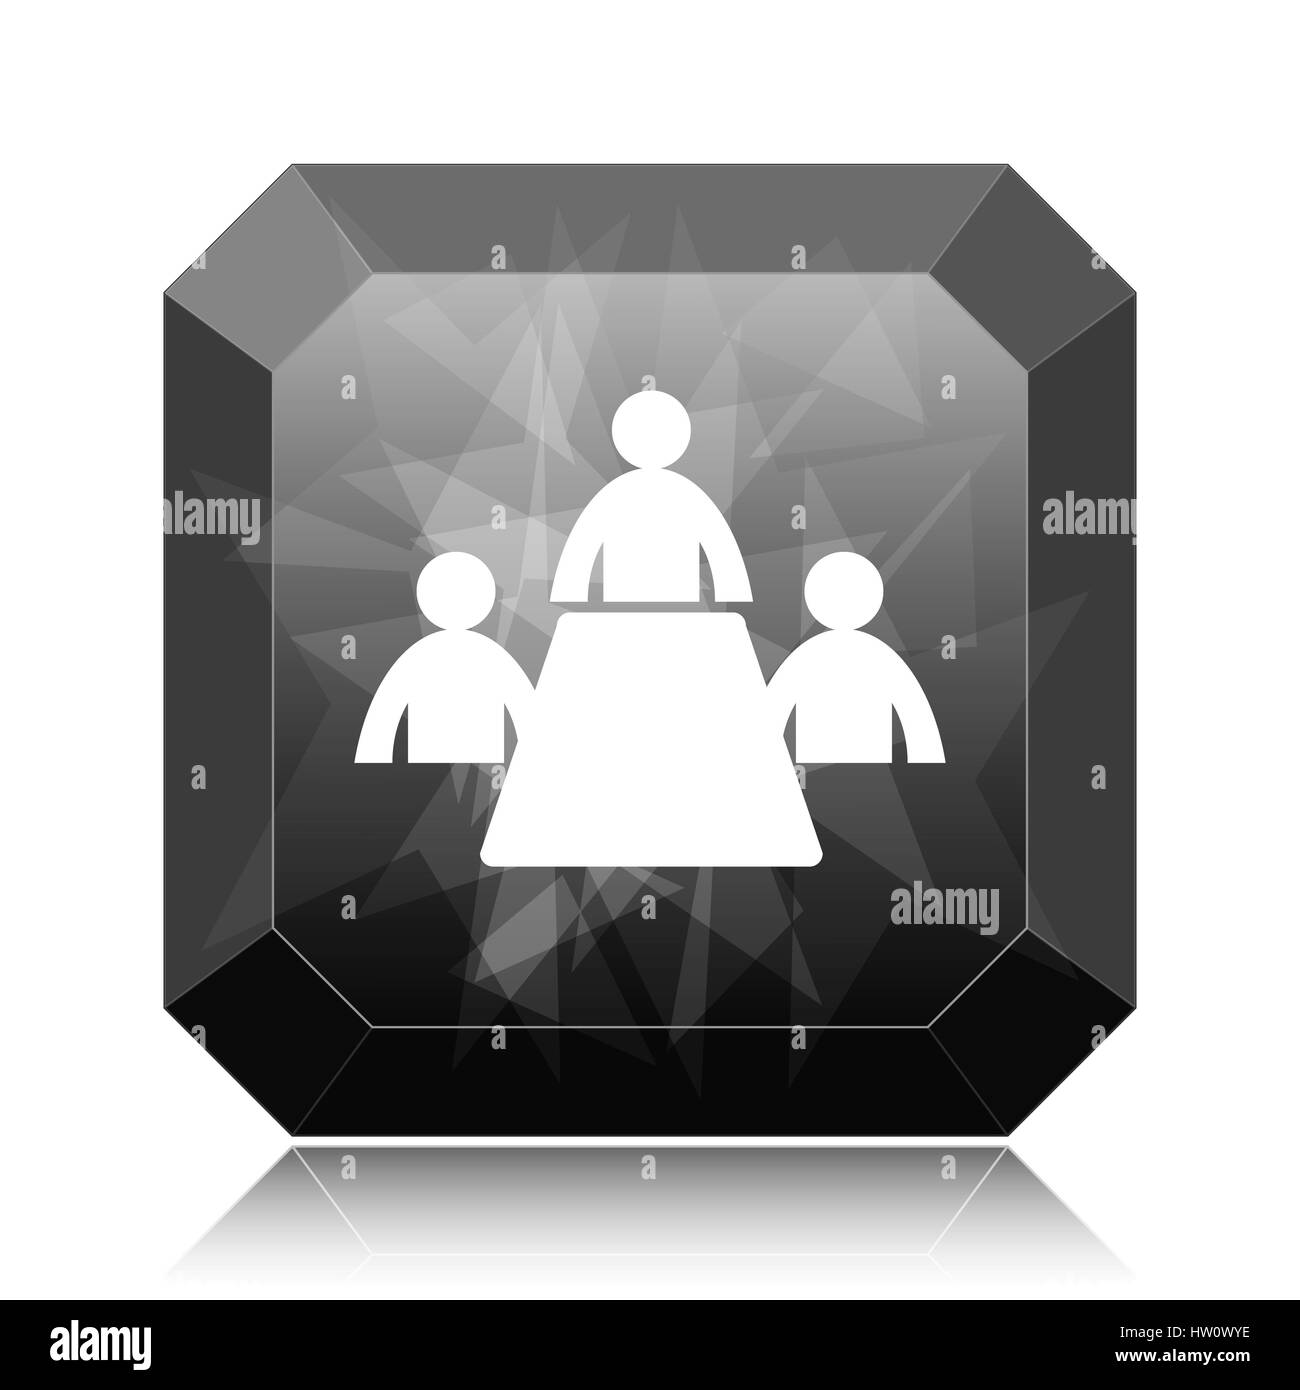 Meeting room icon, black website button on white background. Stock Photo